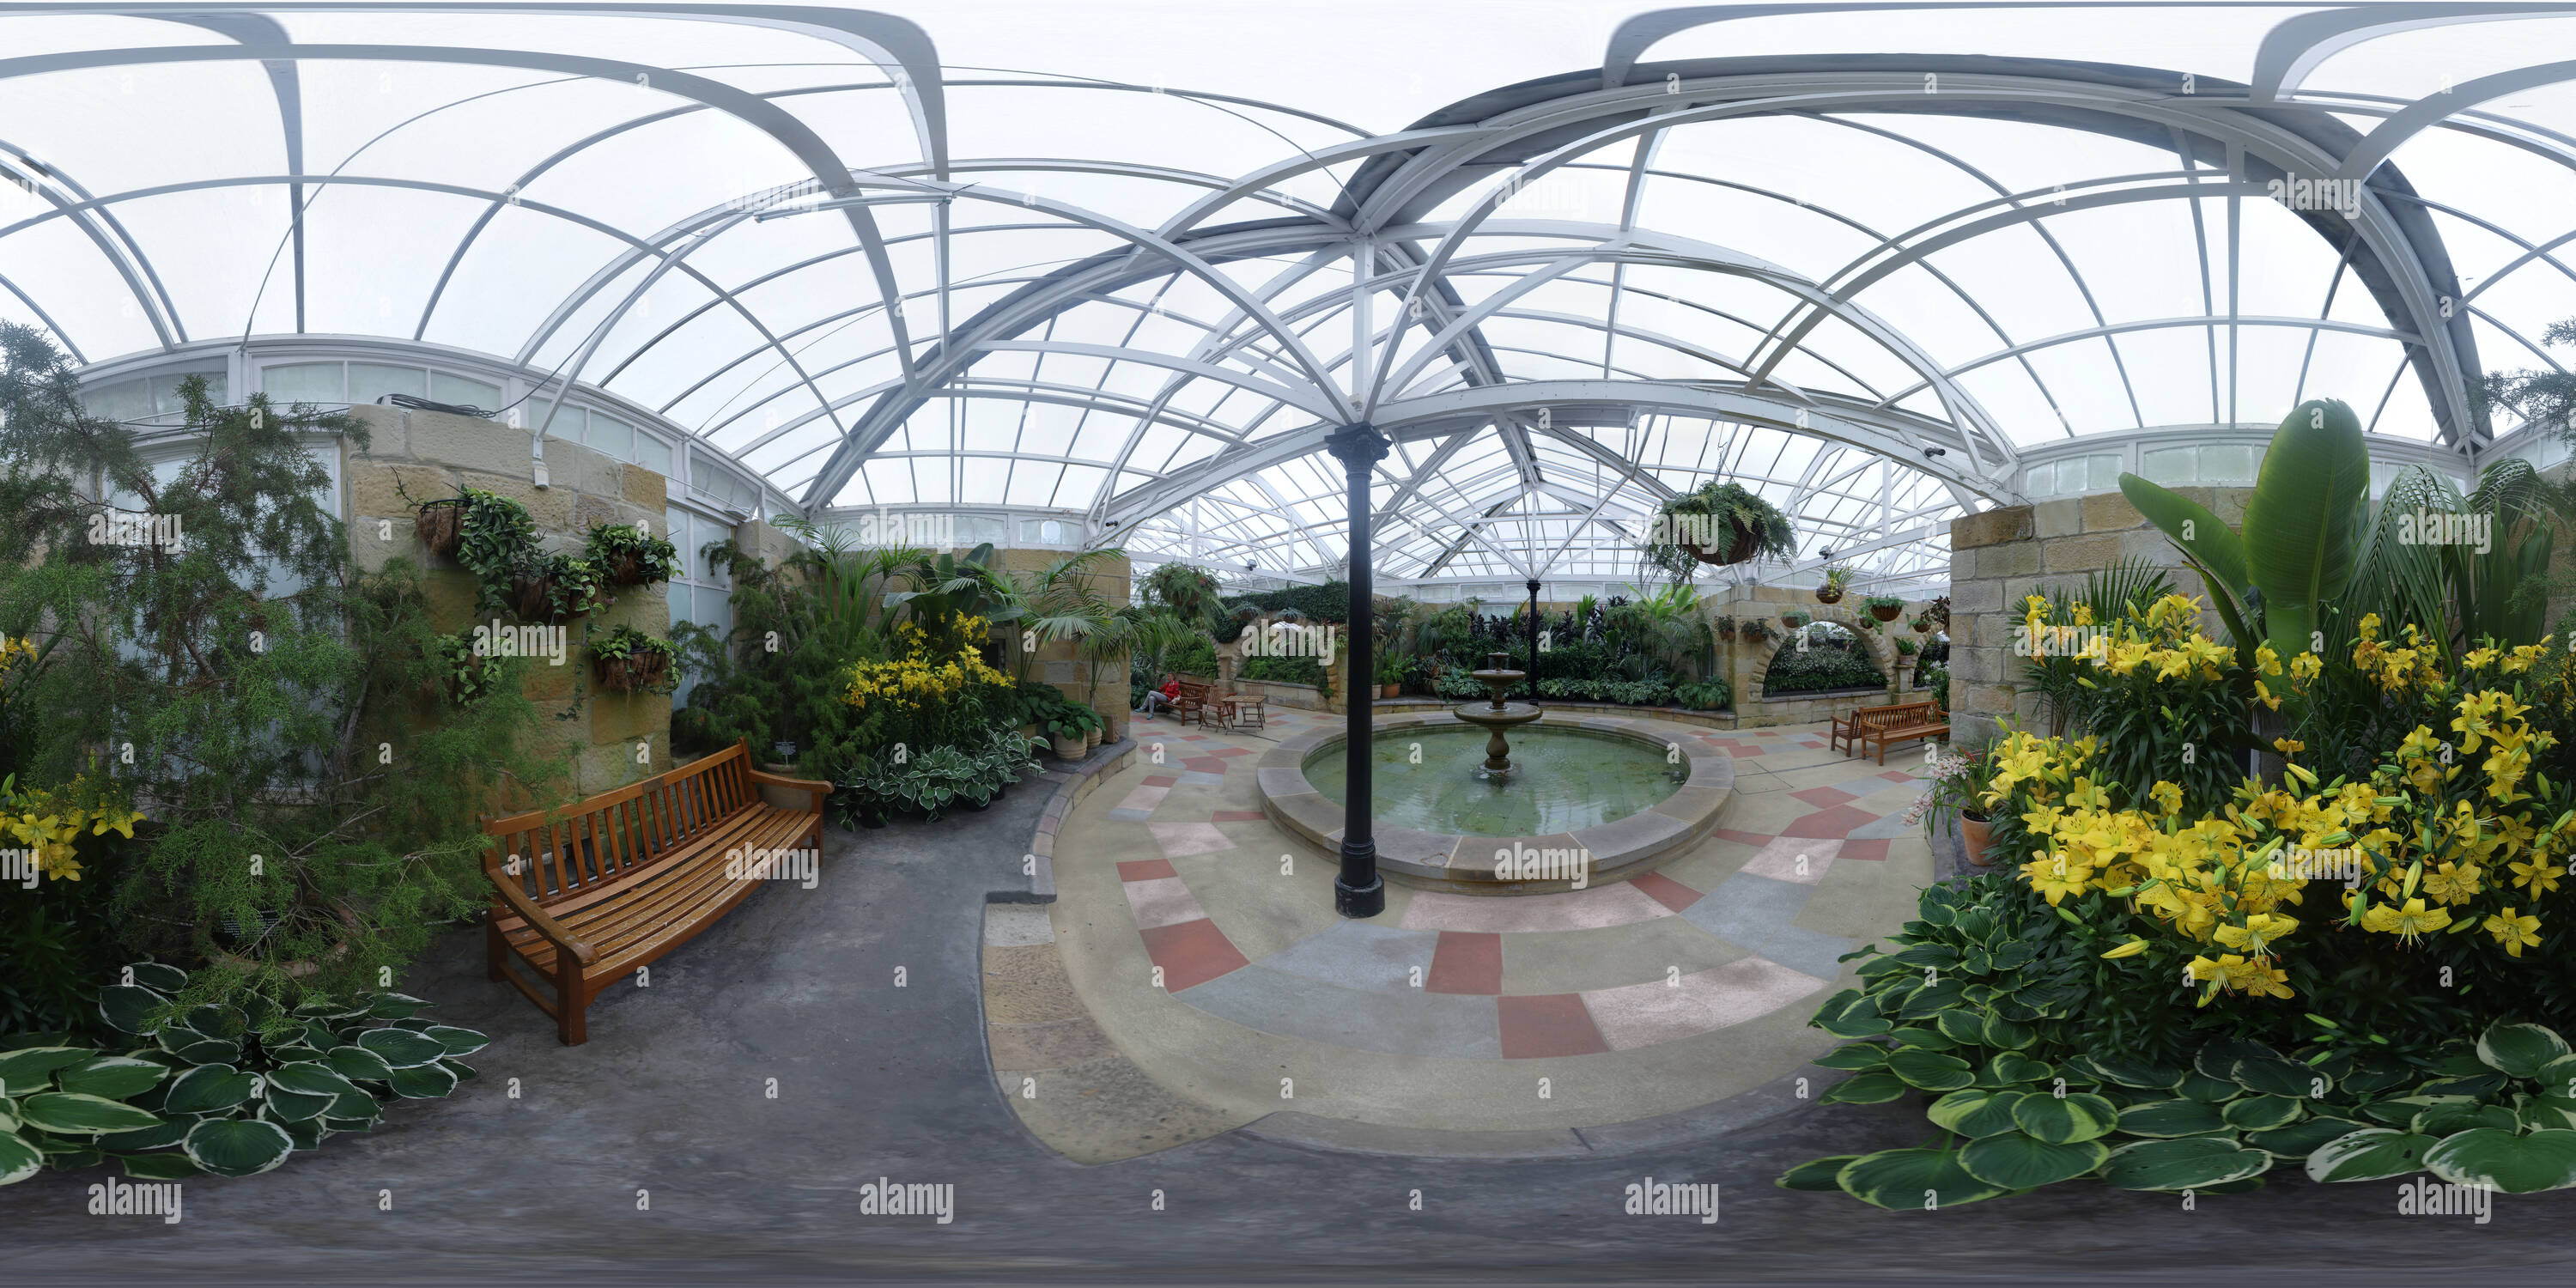 360 degree panoramic view of The Conservatory at the Royal Tasmanian Botanical Gardens